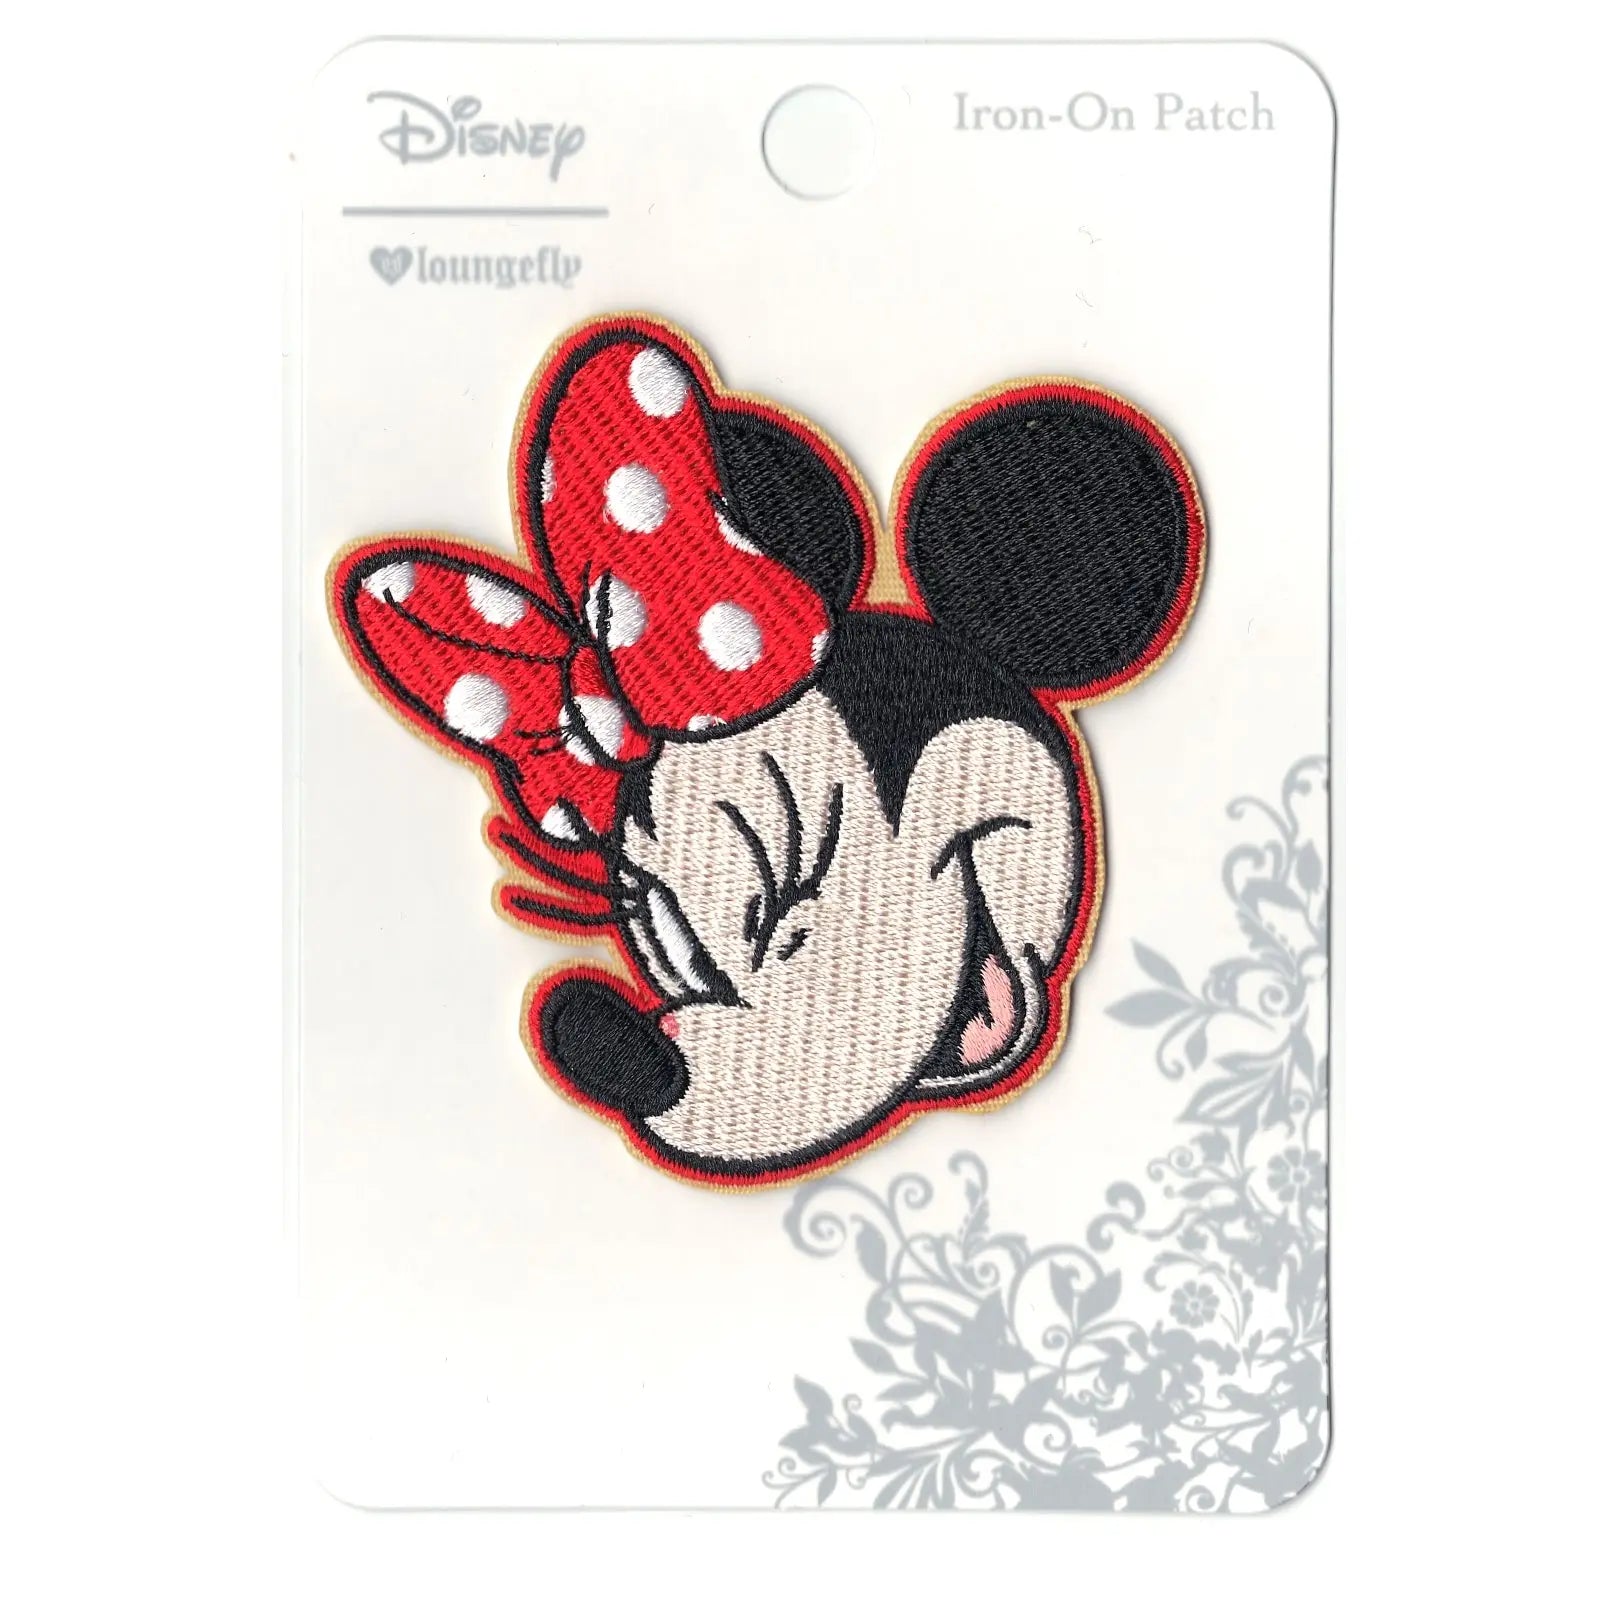 Disney Minnie Mouse Wink Iron on Patch 